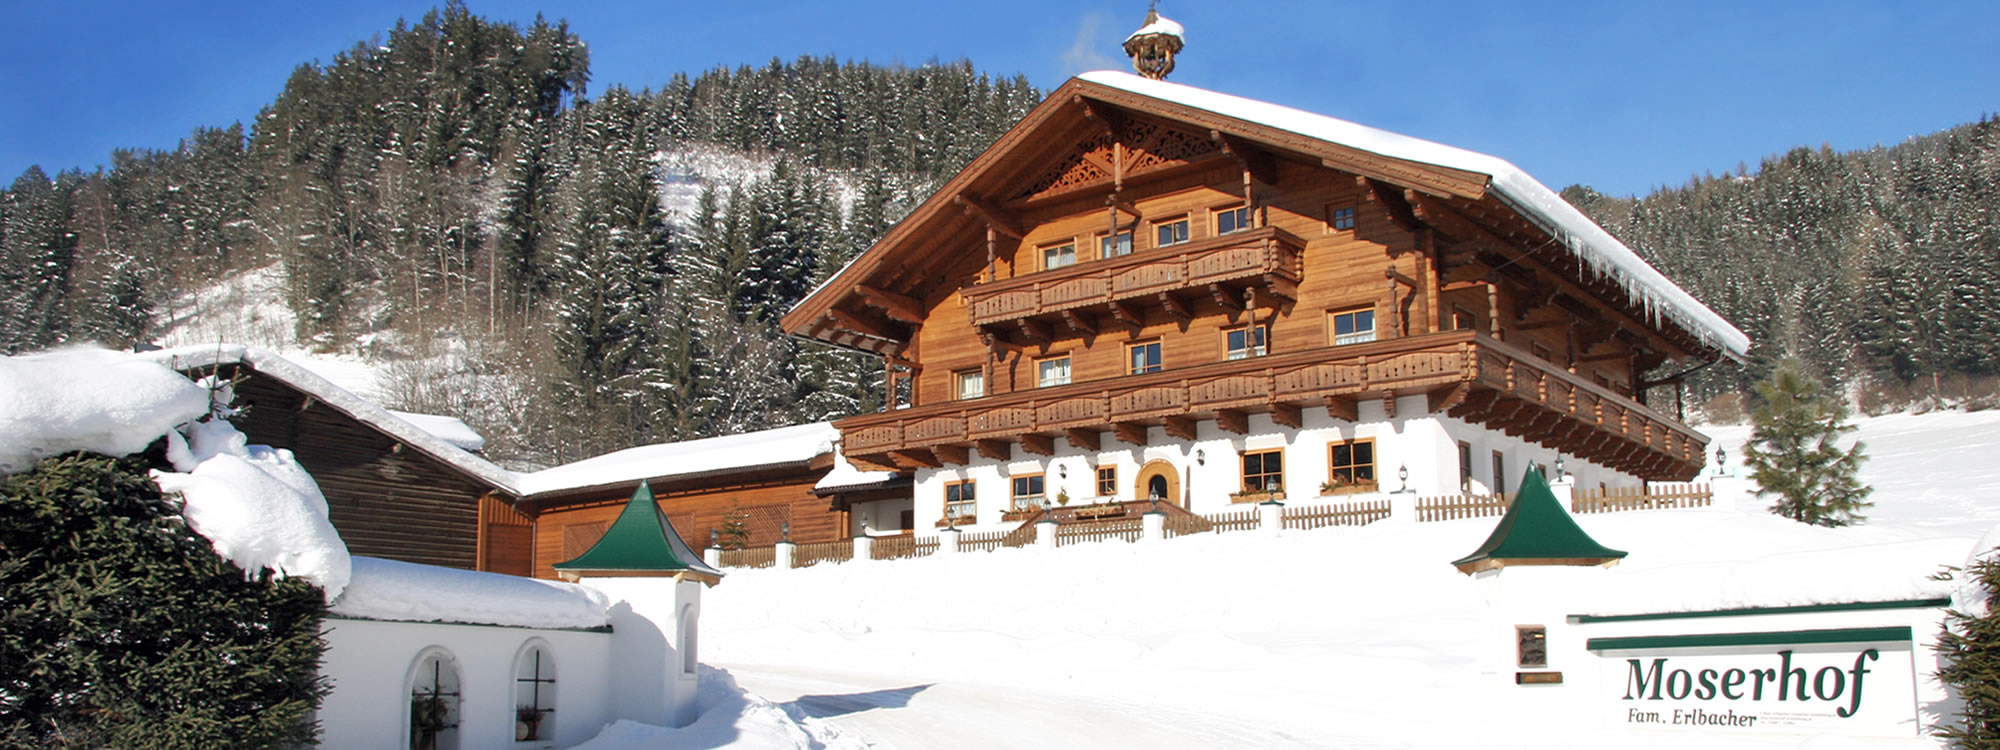 Appartements in Schladming am Moserhof